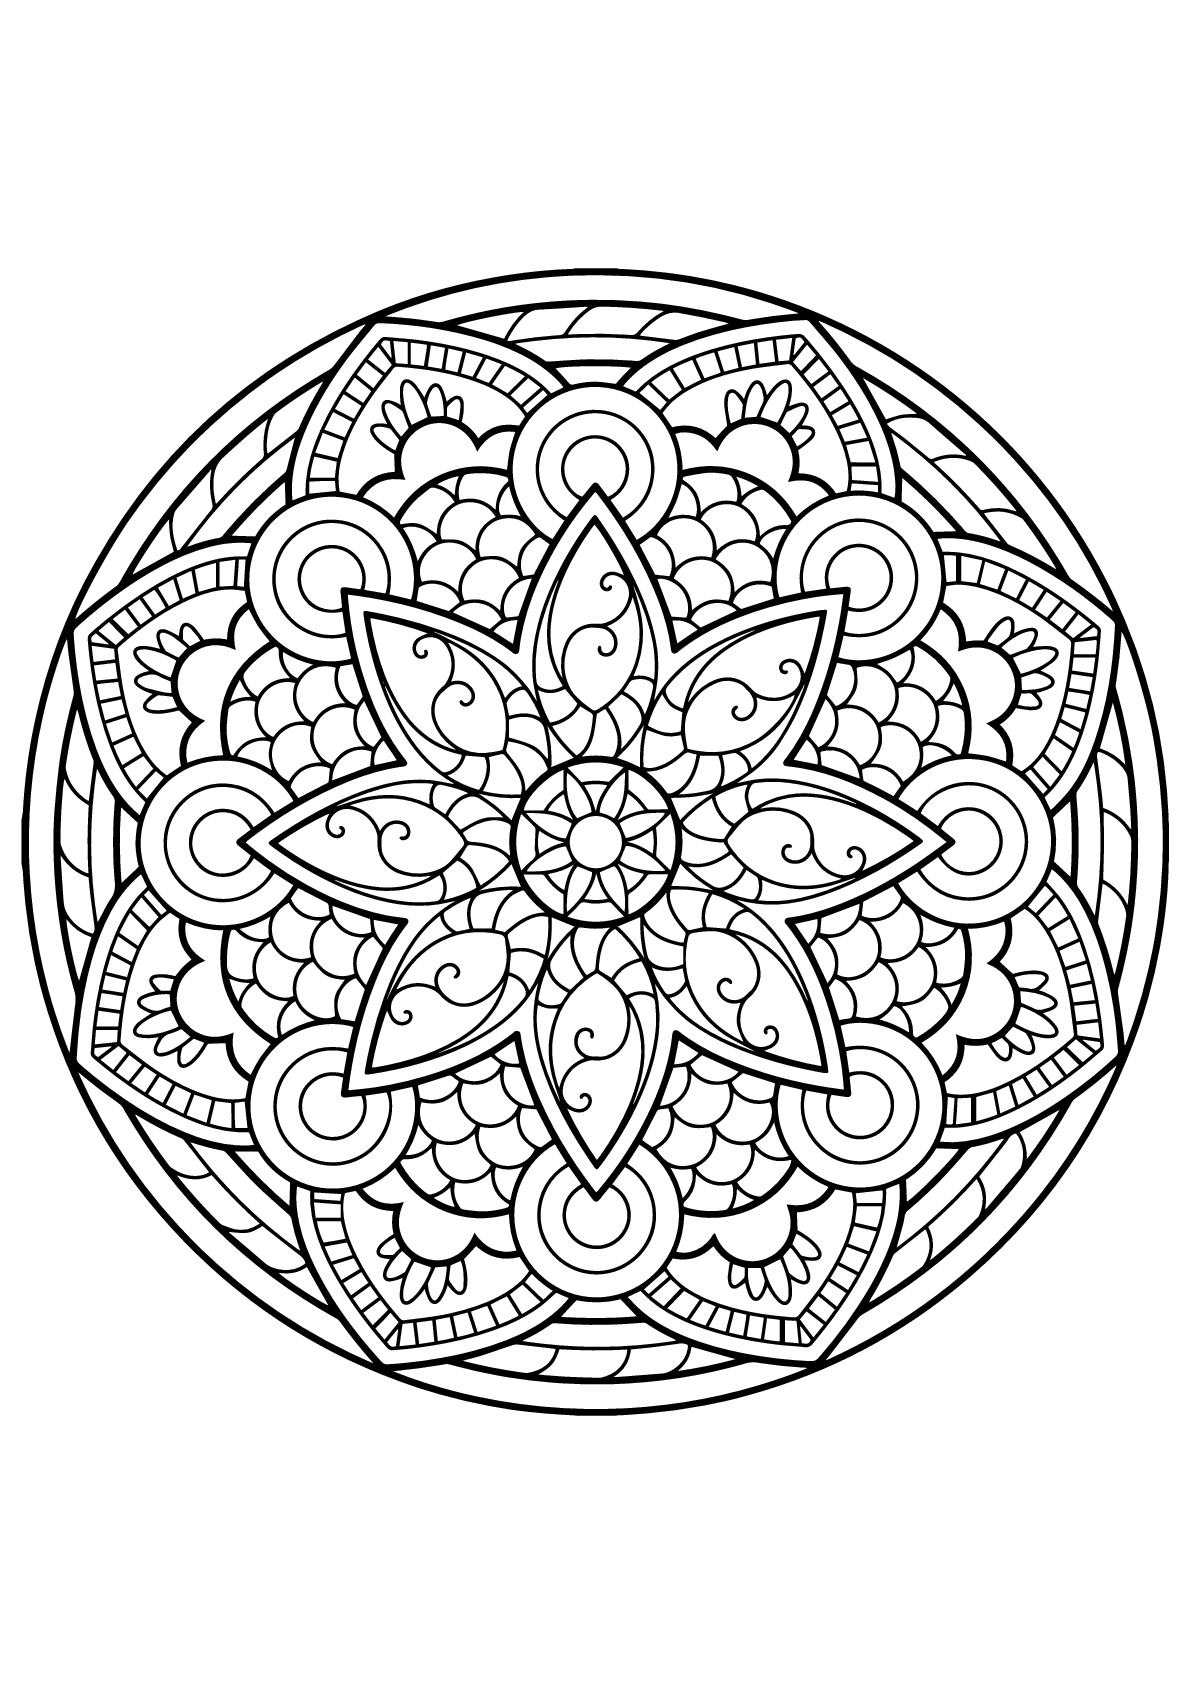 Adult Coloring Book: Mandalas #4: Coloring Book for Adults Featuring 50  High Definition Mandala Designs (Large Print / Paperback)